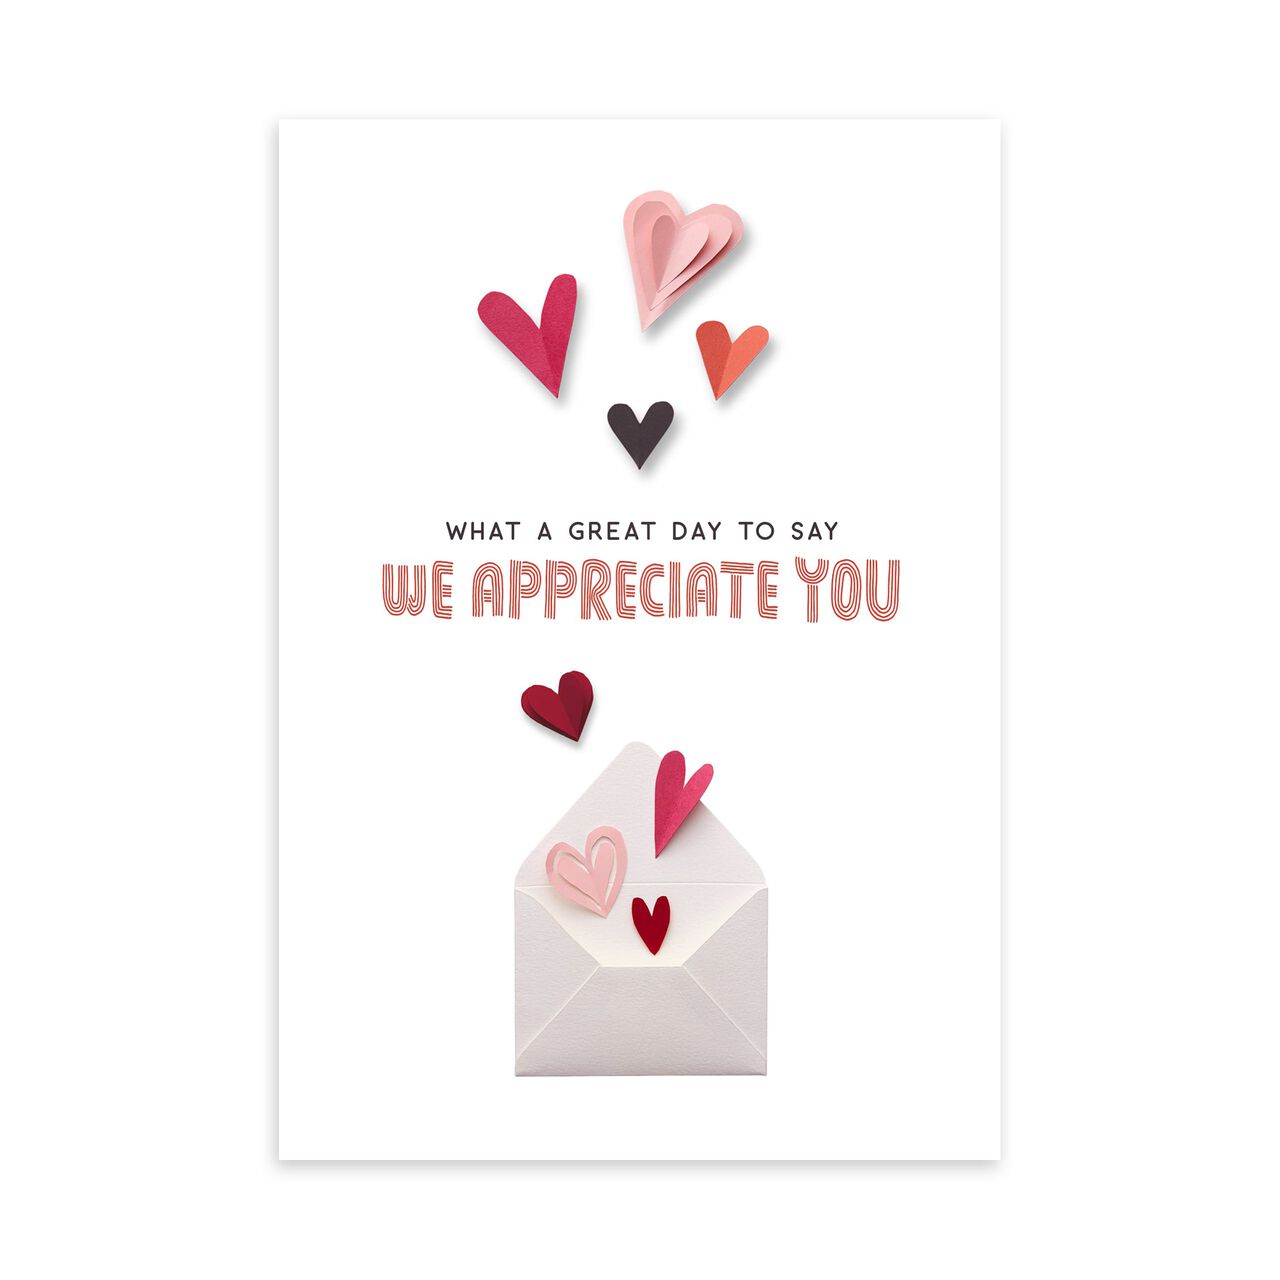  Hallmark Valentines Day Cards Pack, Heart (6 Valentine Cards  with Envelopes) : Office Products